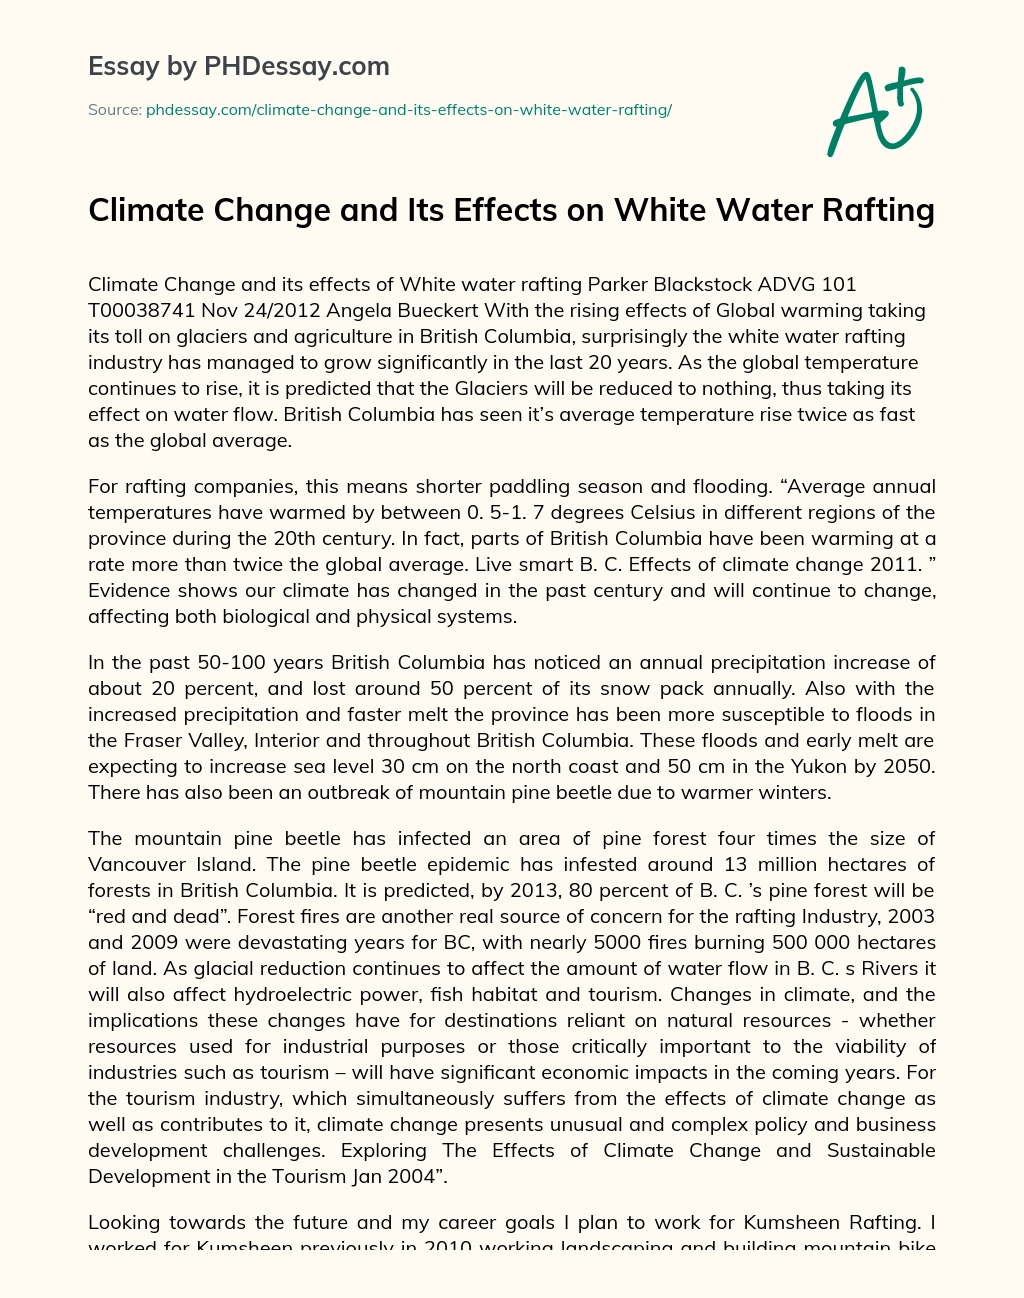 Climate Change and Its Effects on White Water Rafting essay